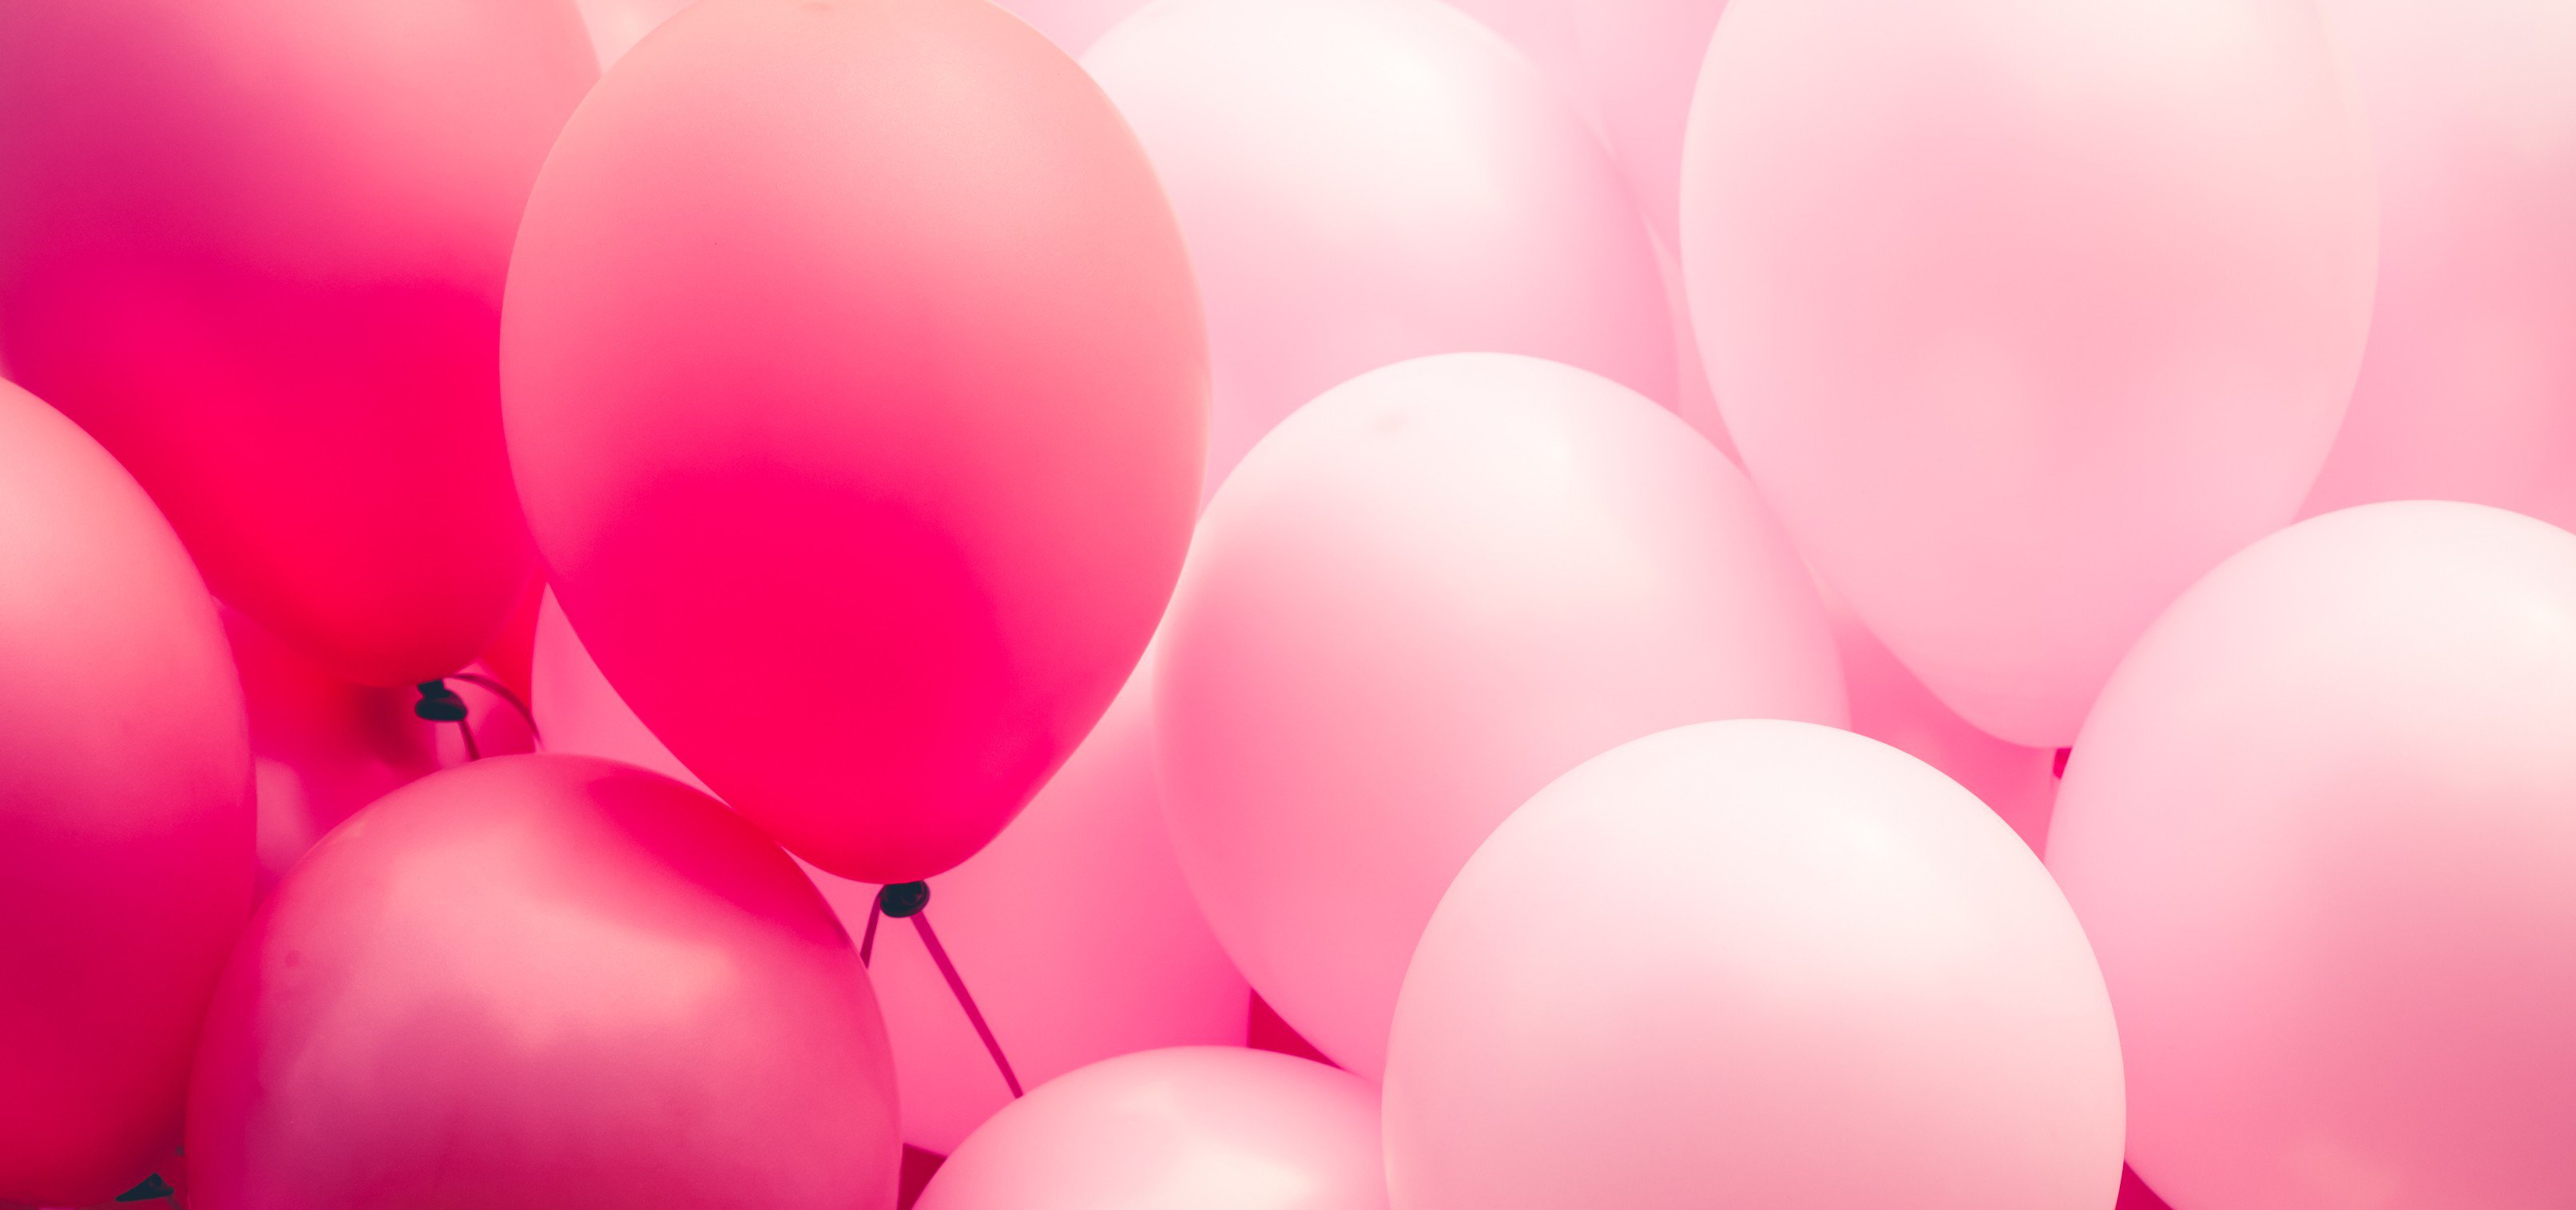 High Resolution Wallpaper | Pink Day 3225x1515 px